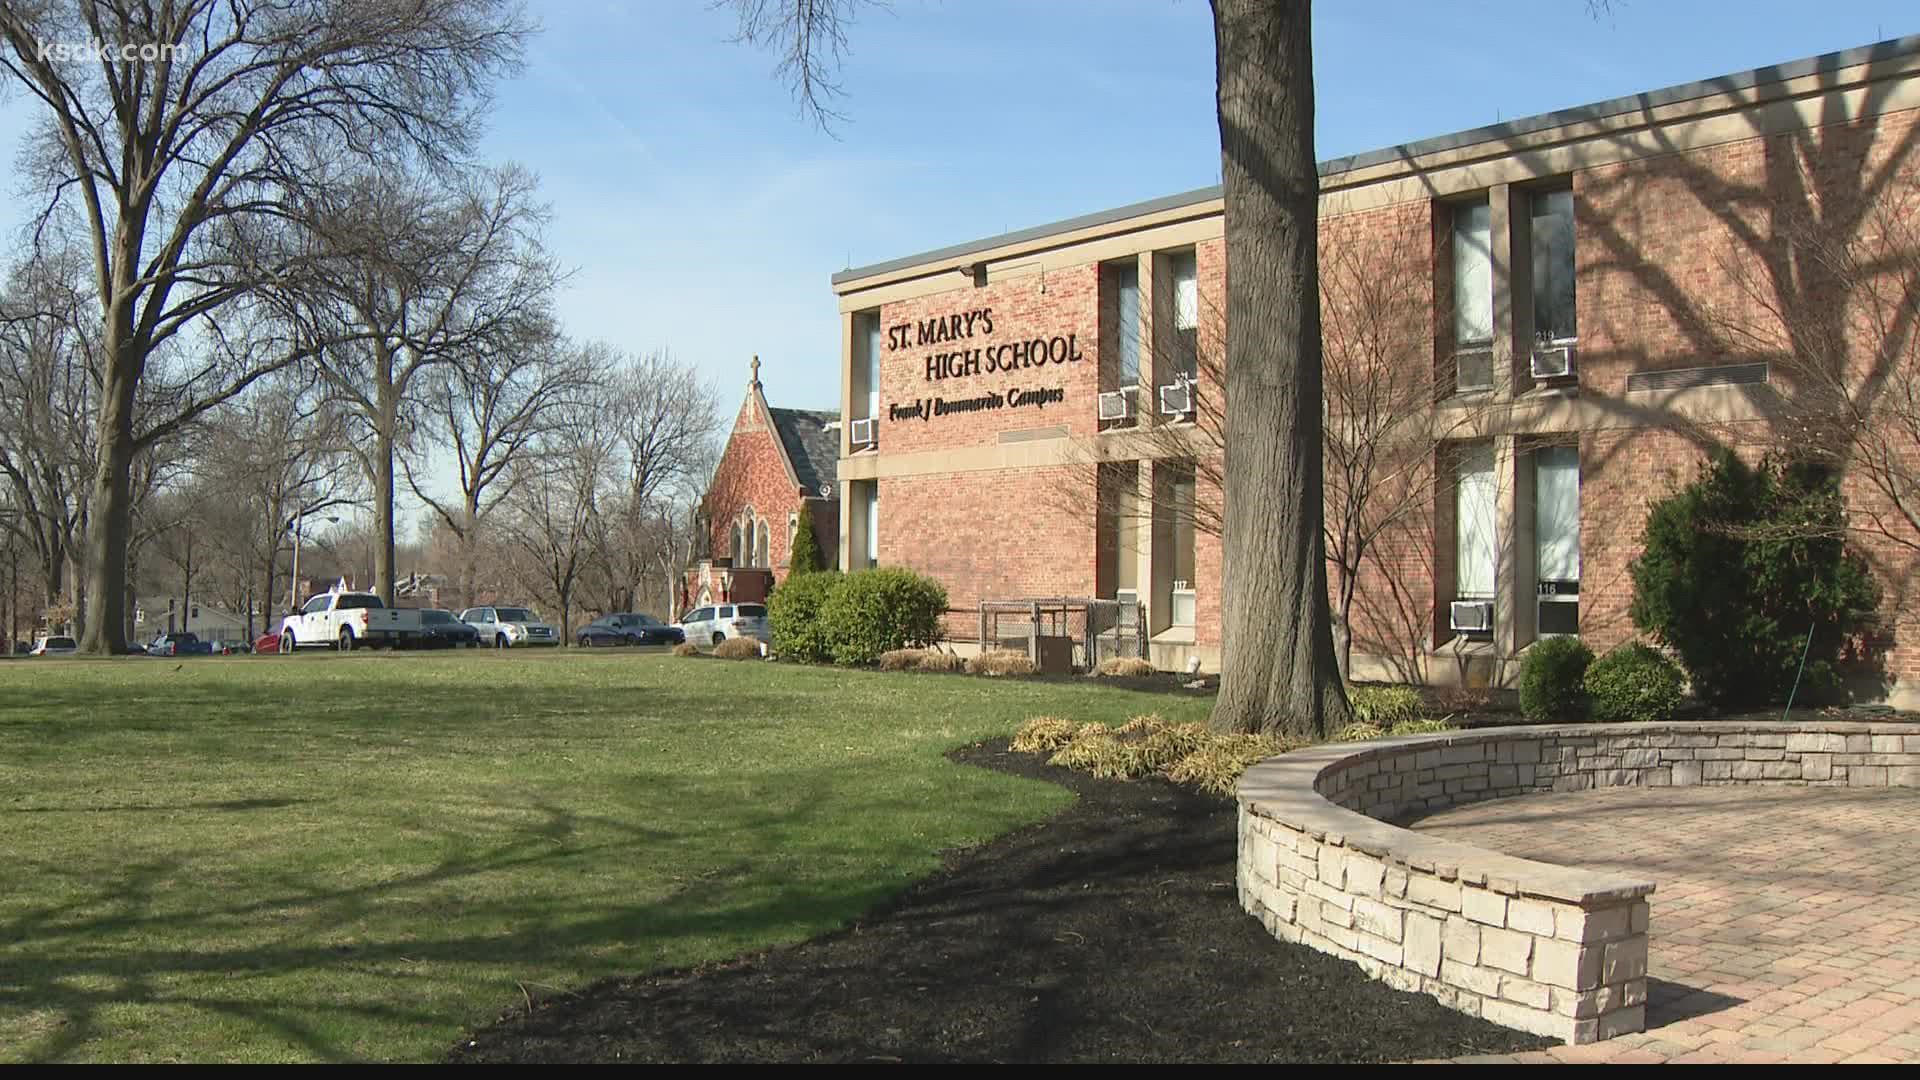 The Archdiocese of St. Louis plans to close St. Mary's High School at the end of the school year. School leaders said they are working on a plan to keep it open.